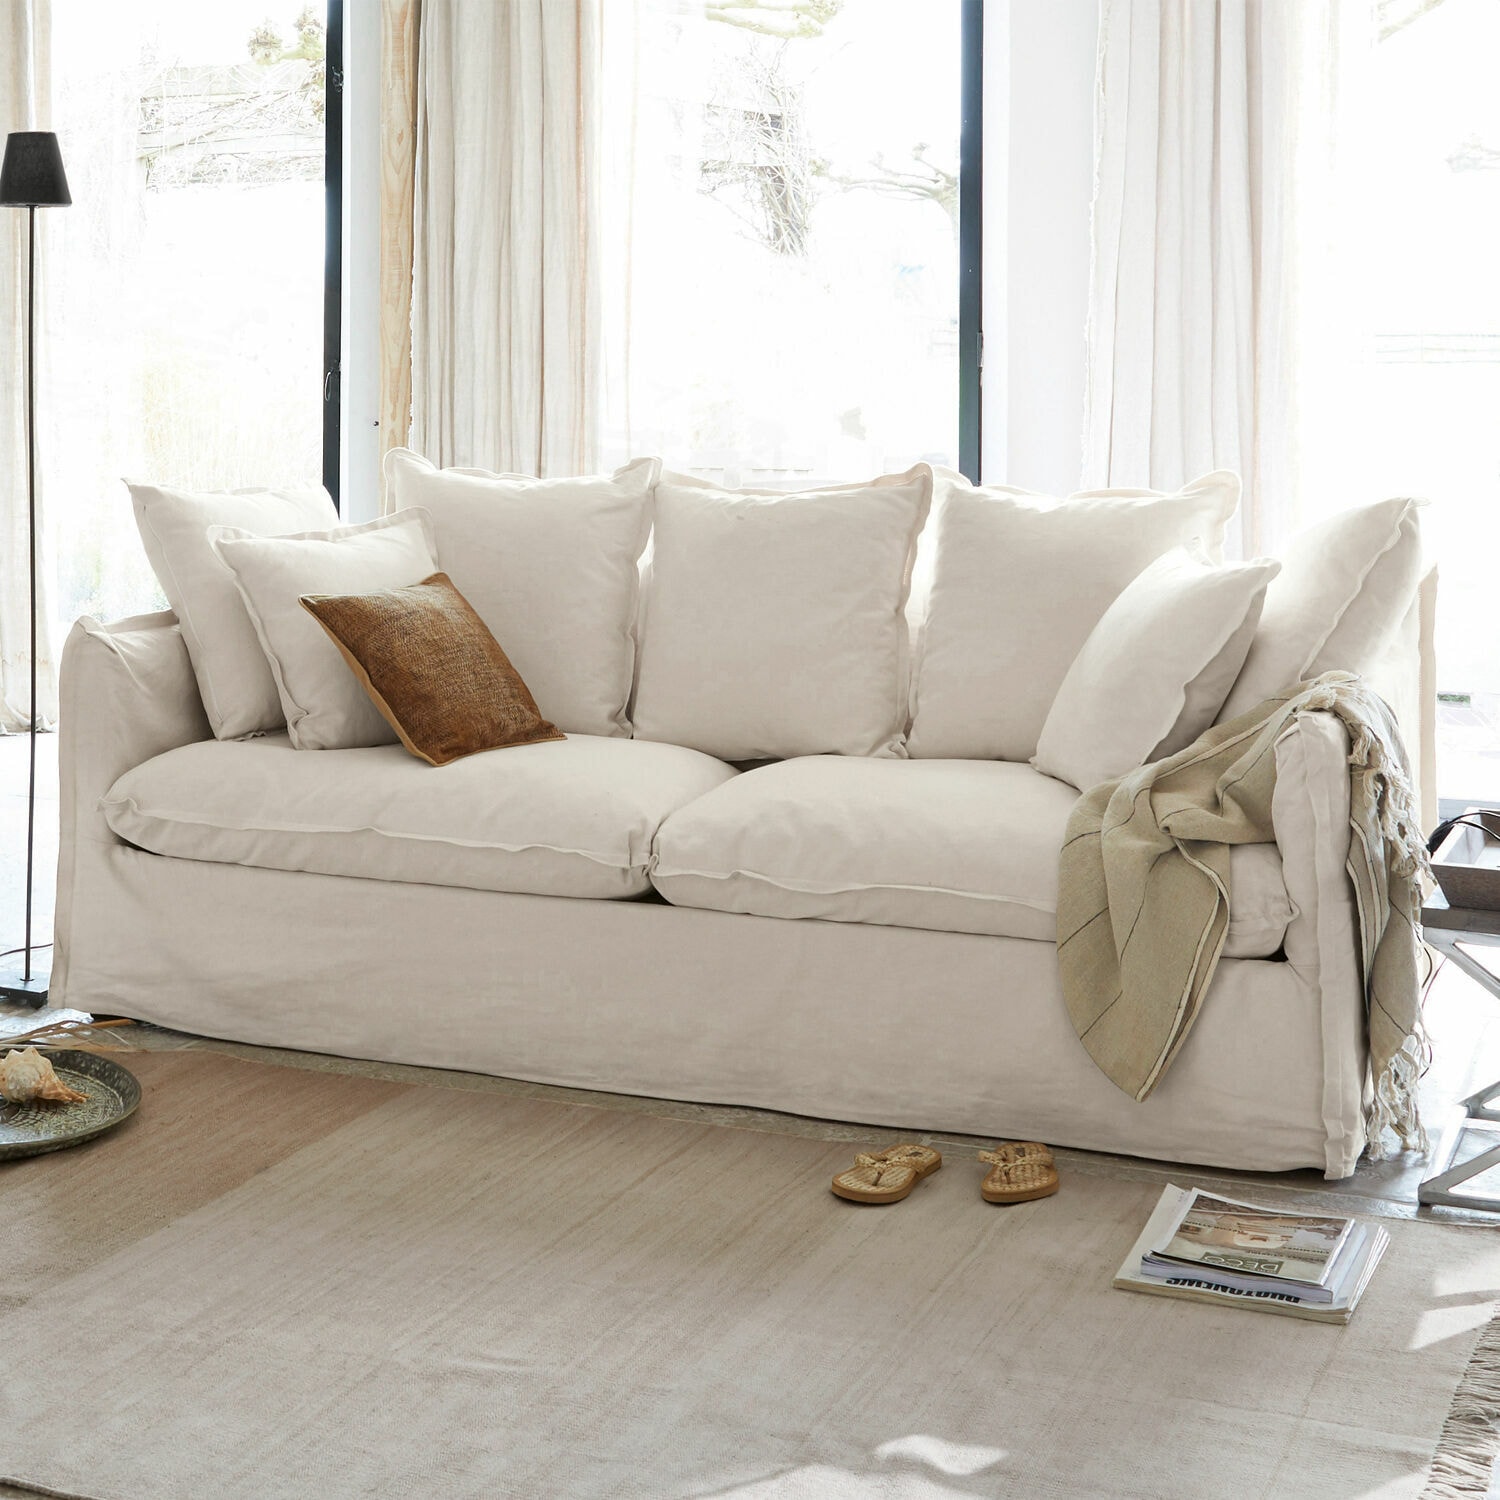 View Photo: Couch potato, couch potata ????featuring our Coastal Sofa.